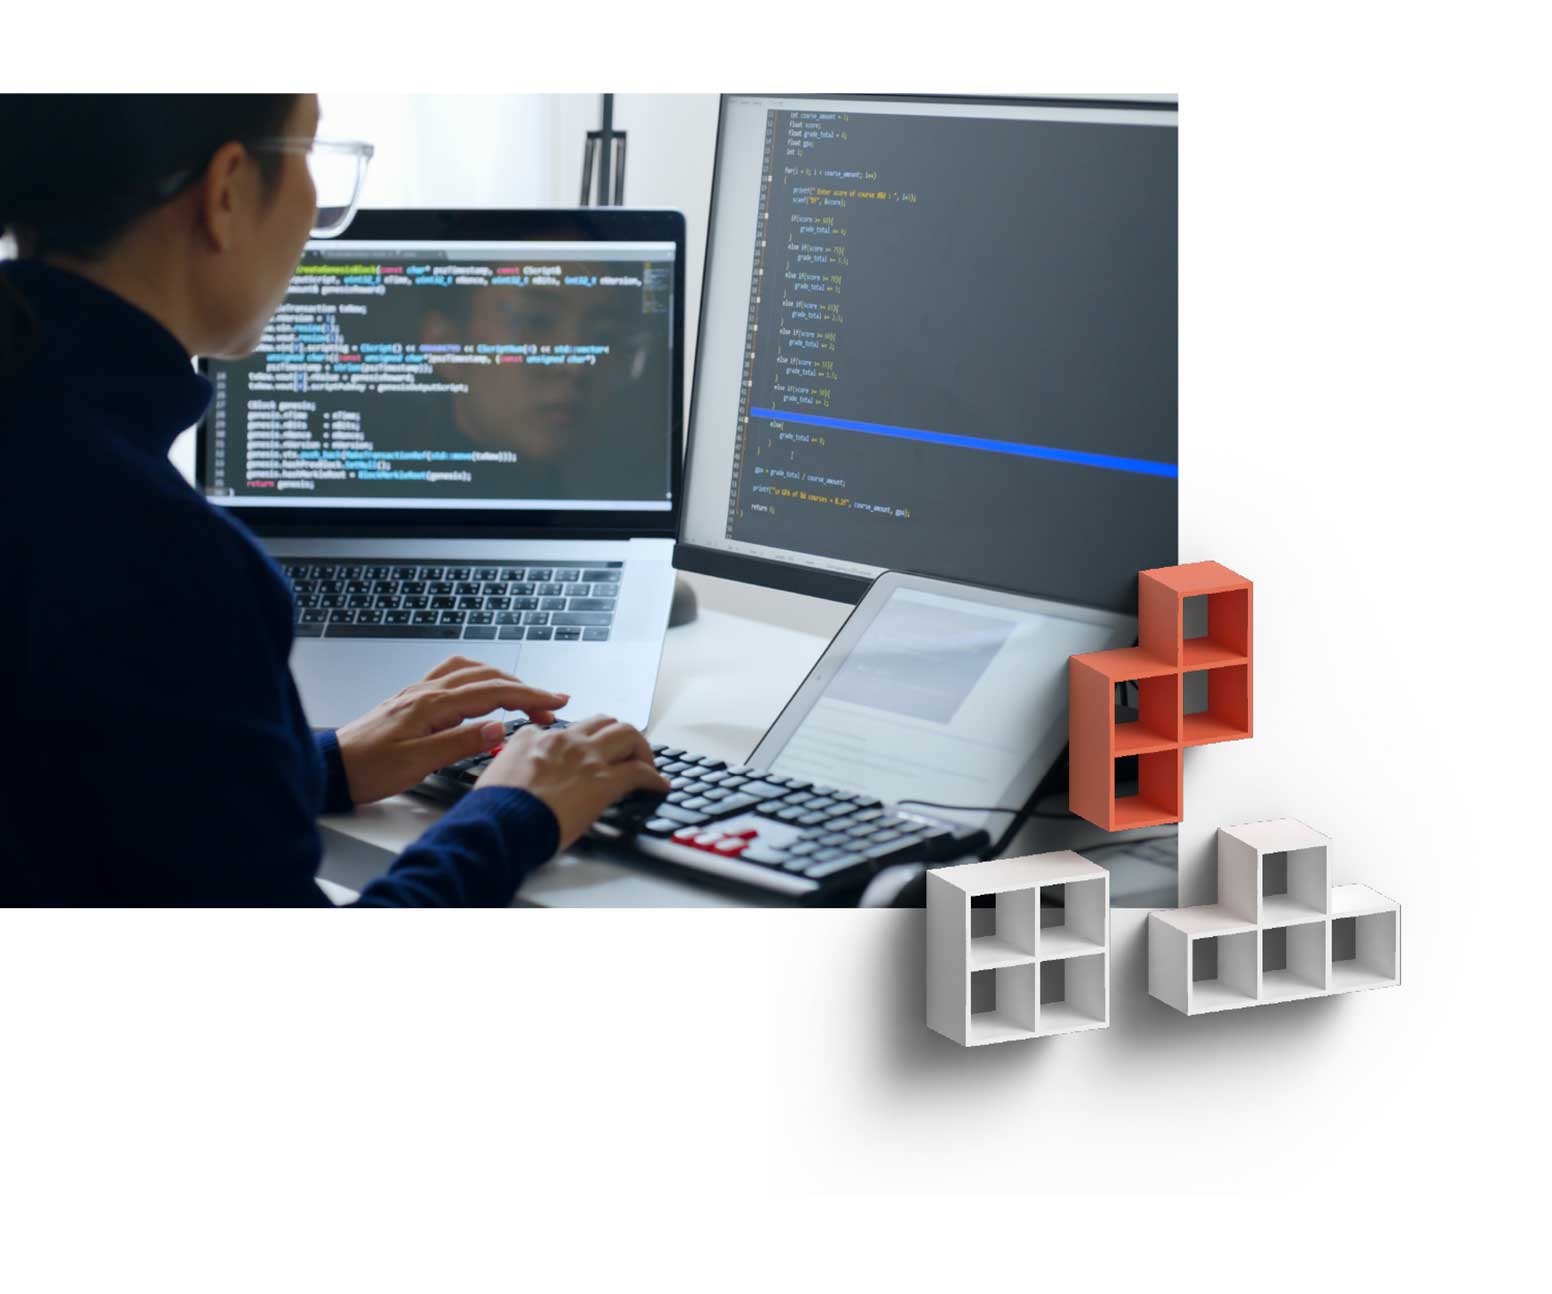 A person editing code on a computer with 3 screens, looking for errors and resolving issues.